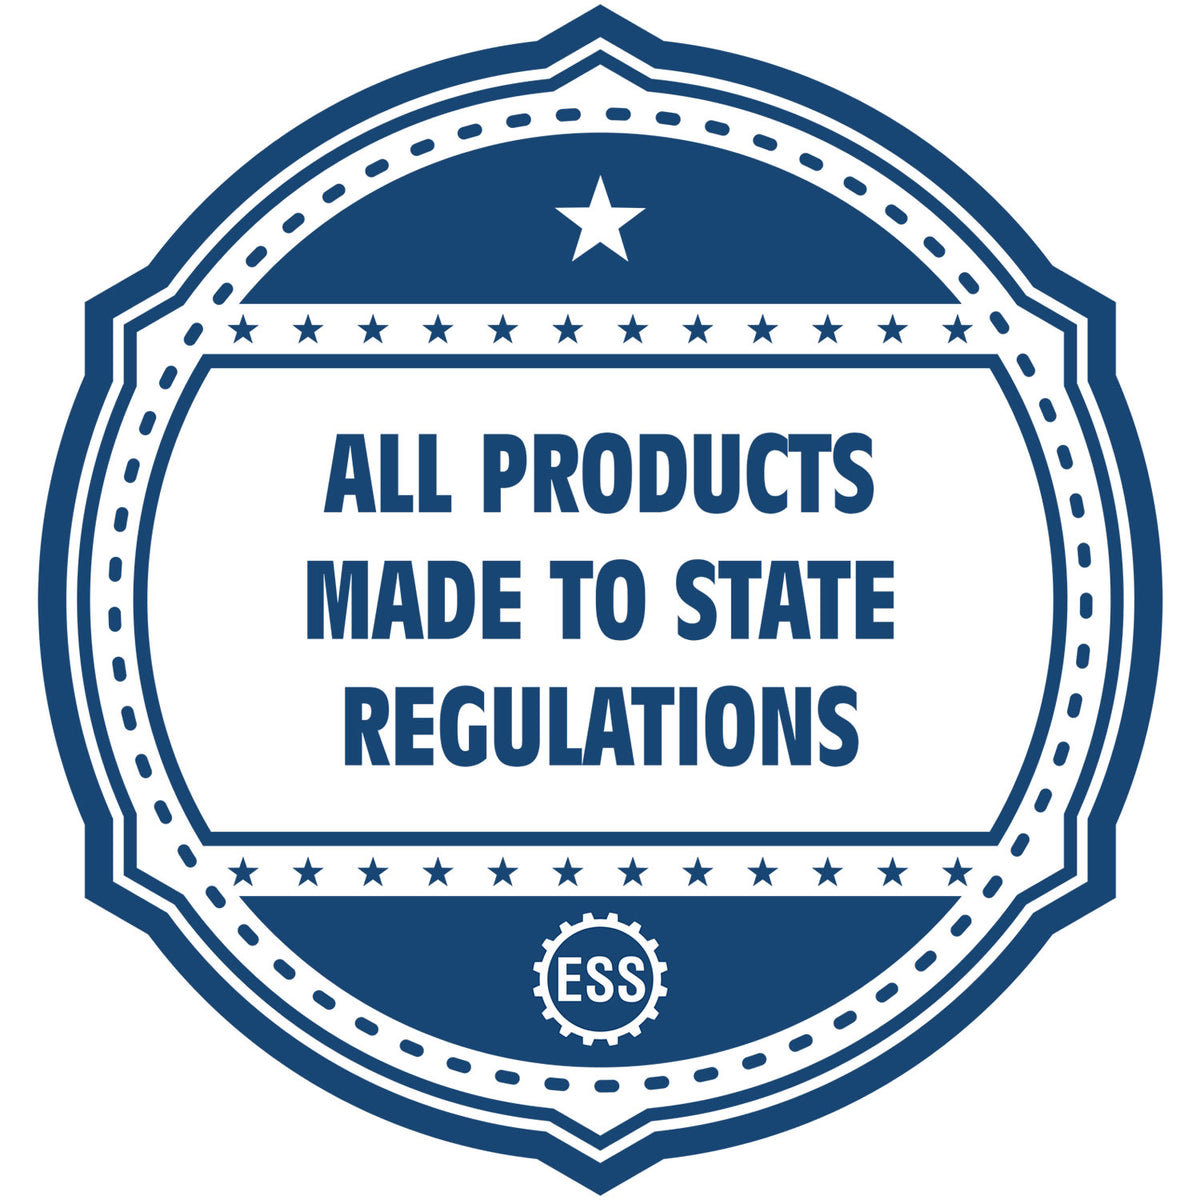 An icon or badge element for the Texas Engineer Desk Seal showing that this product is made in compliance with state regulations.